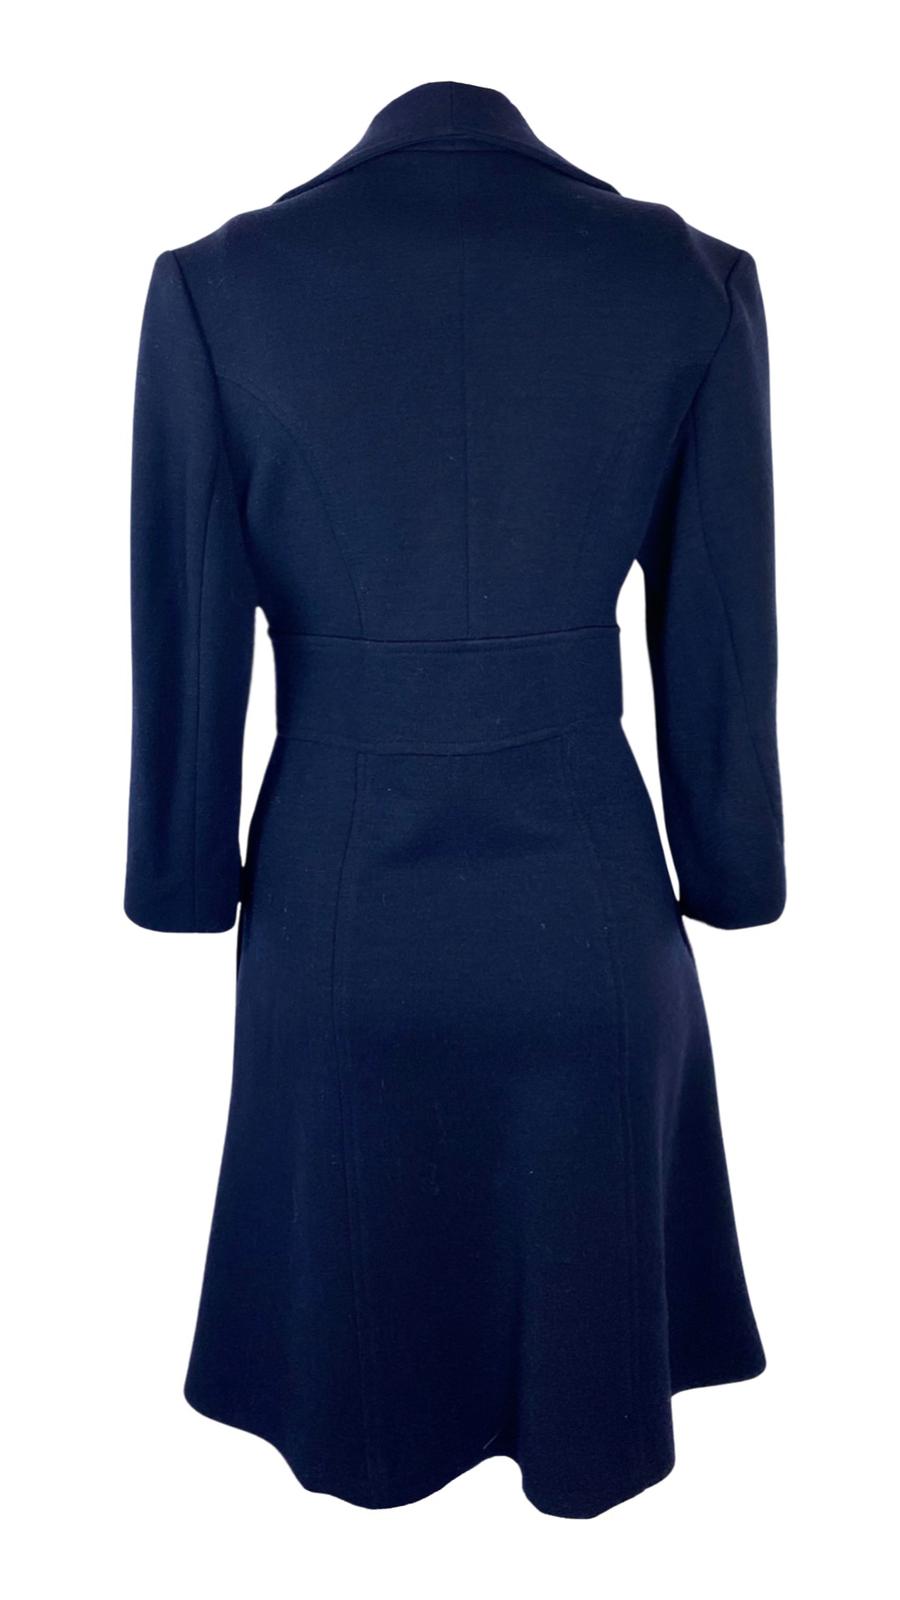 Gorgeous Navy Coat from Goat UK 8 - US 4-The Freperie